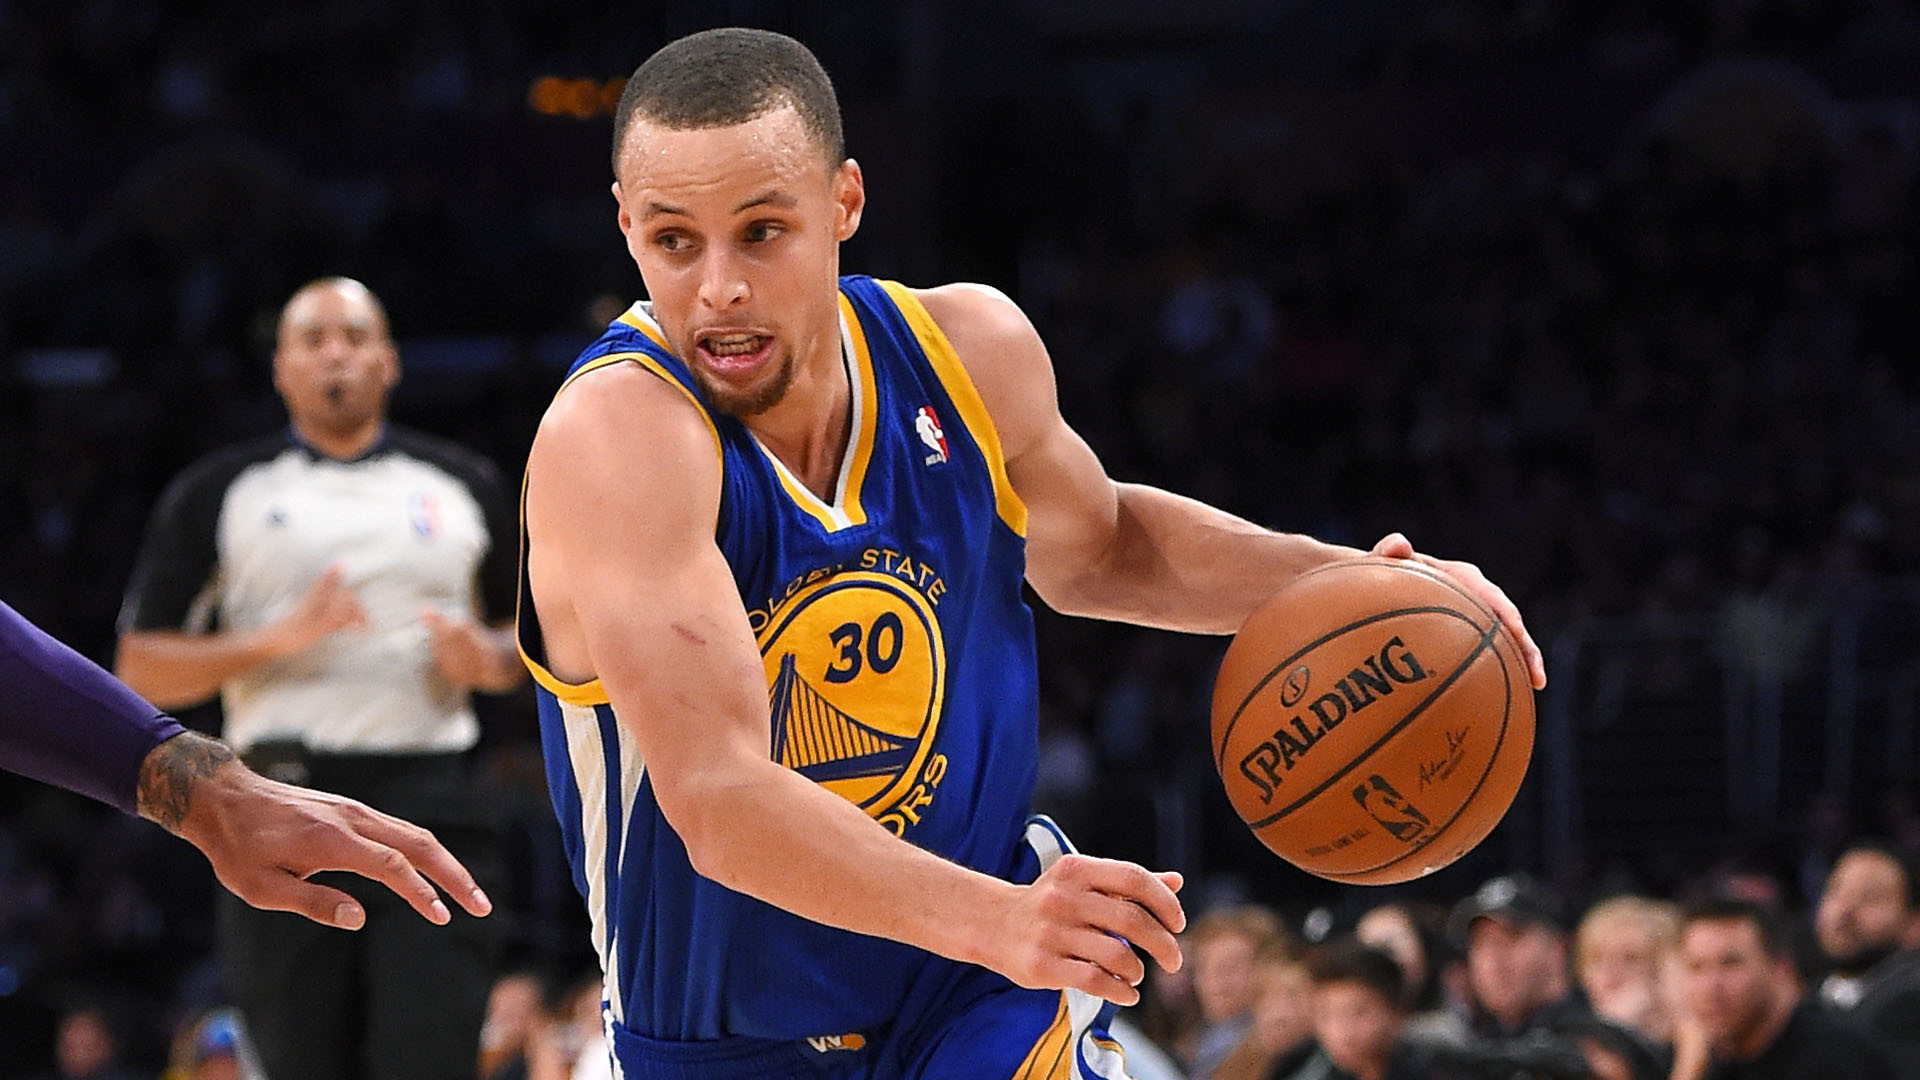 1920x1080 Golden State Warriors guard Stephen Curry. stephen_curry_images-wallpaper